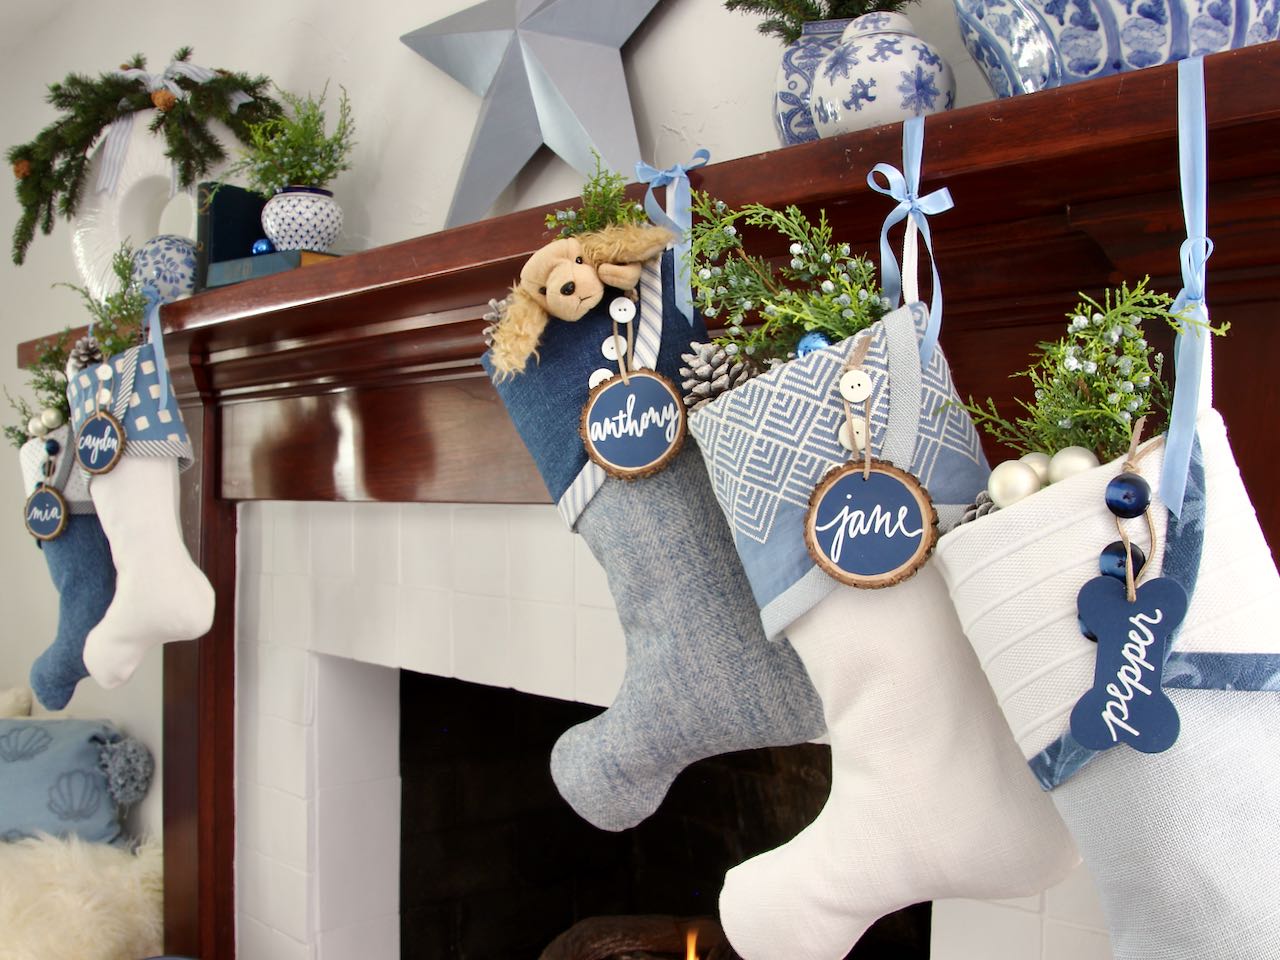 5 coordinating yet unique Christmas stockings are hanging from a mantel fflanking a fire. Tree slice name tags hang from the top of three buttons on each cuff